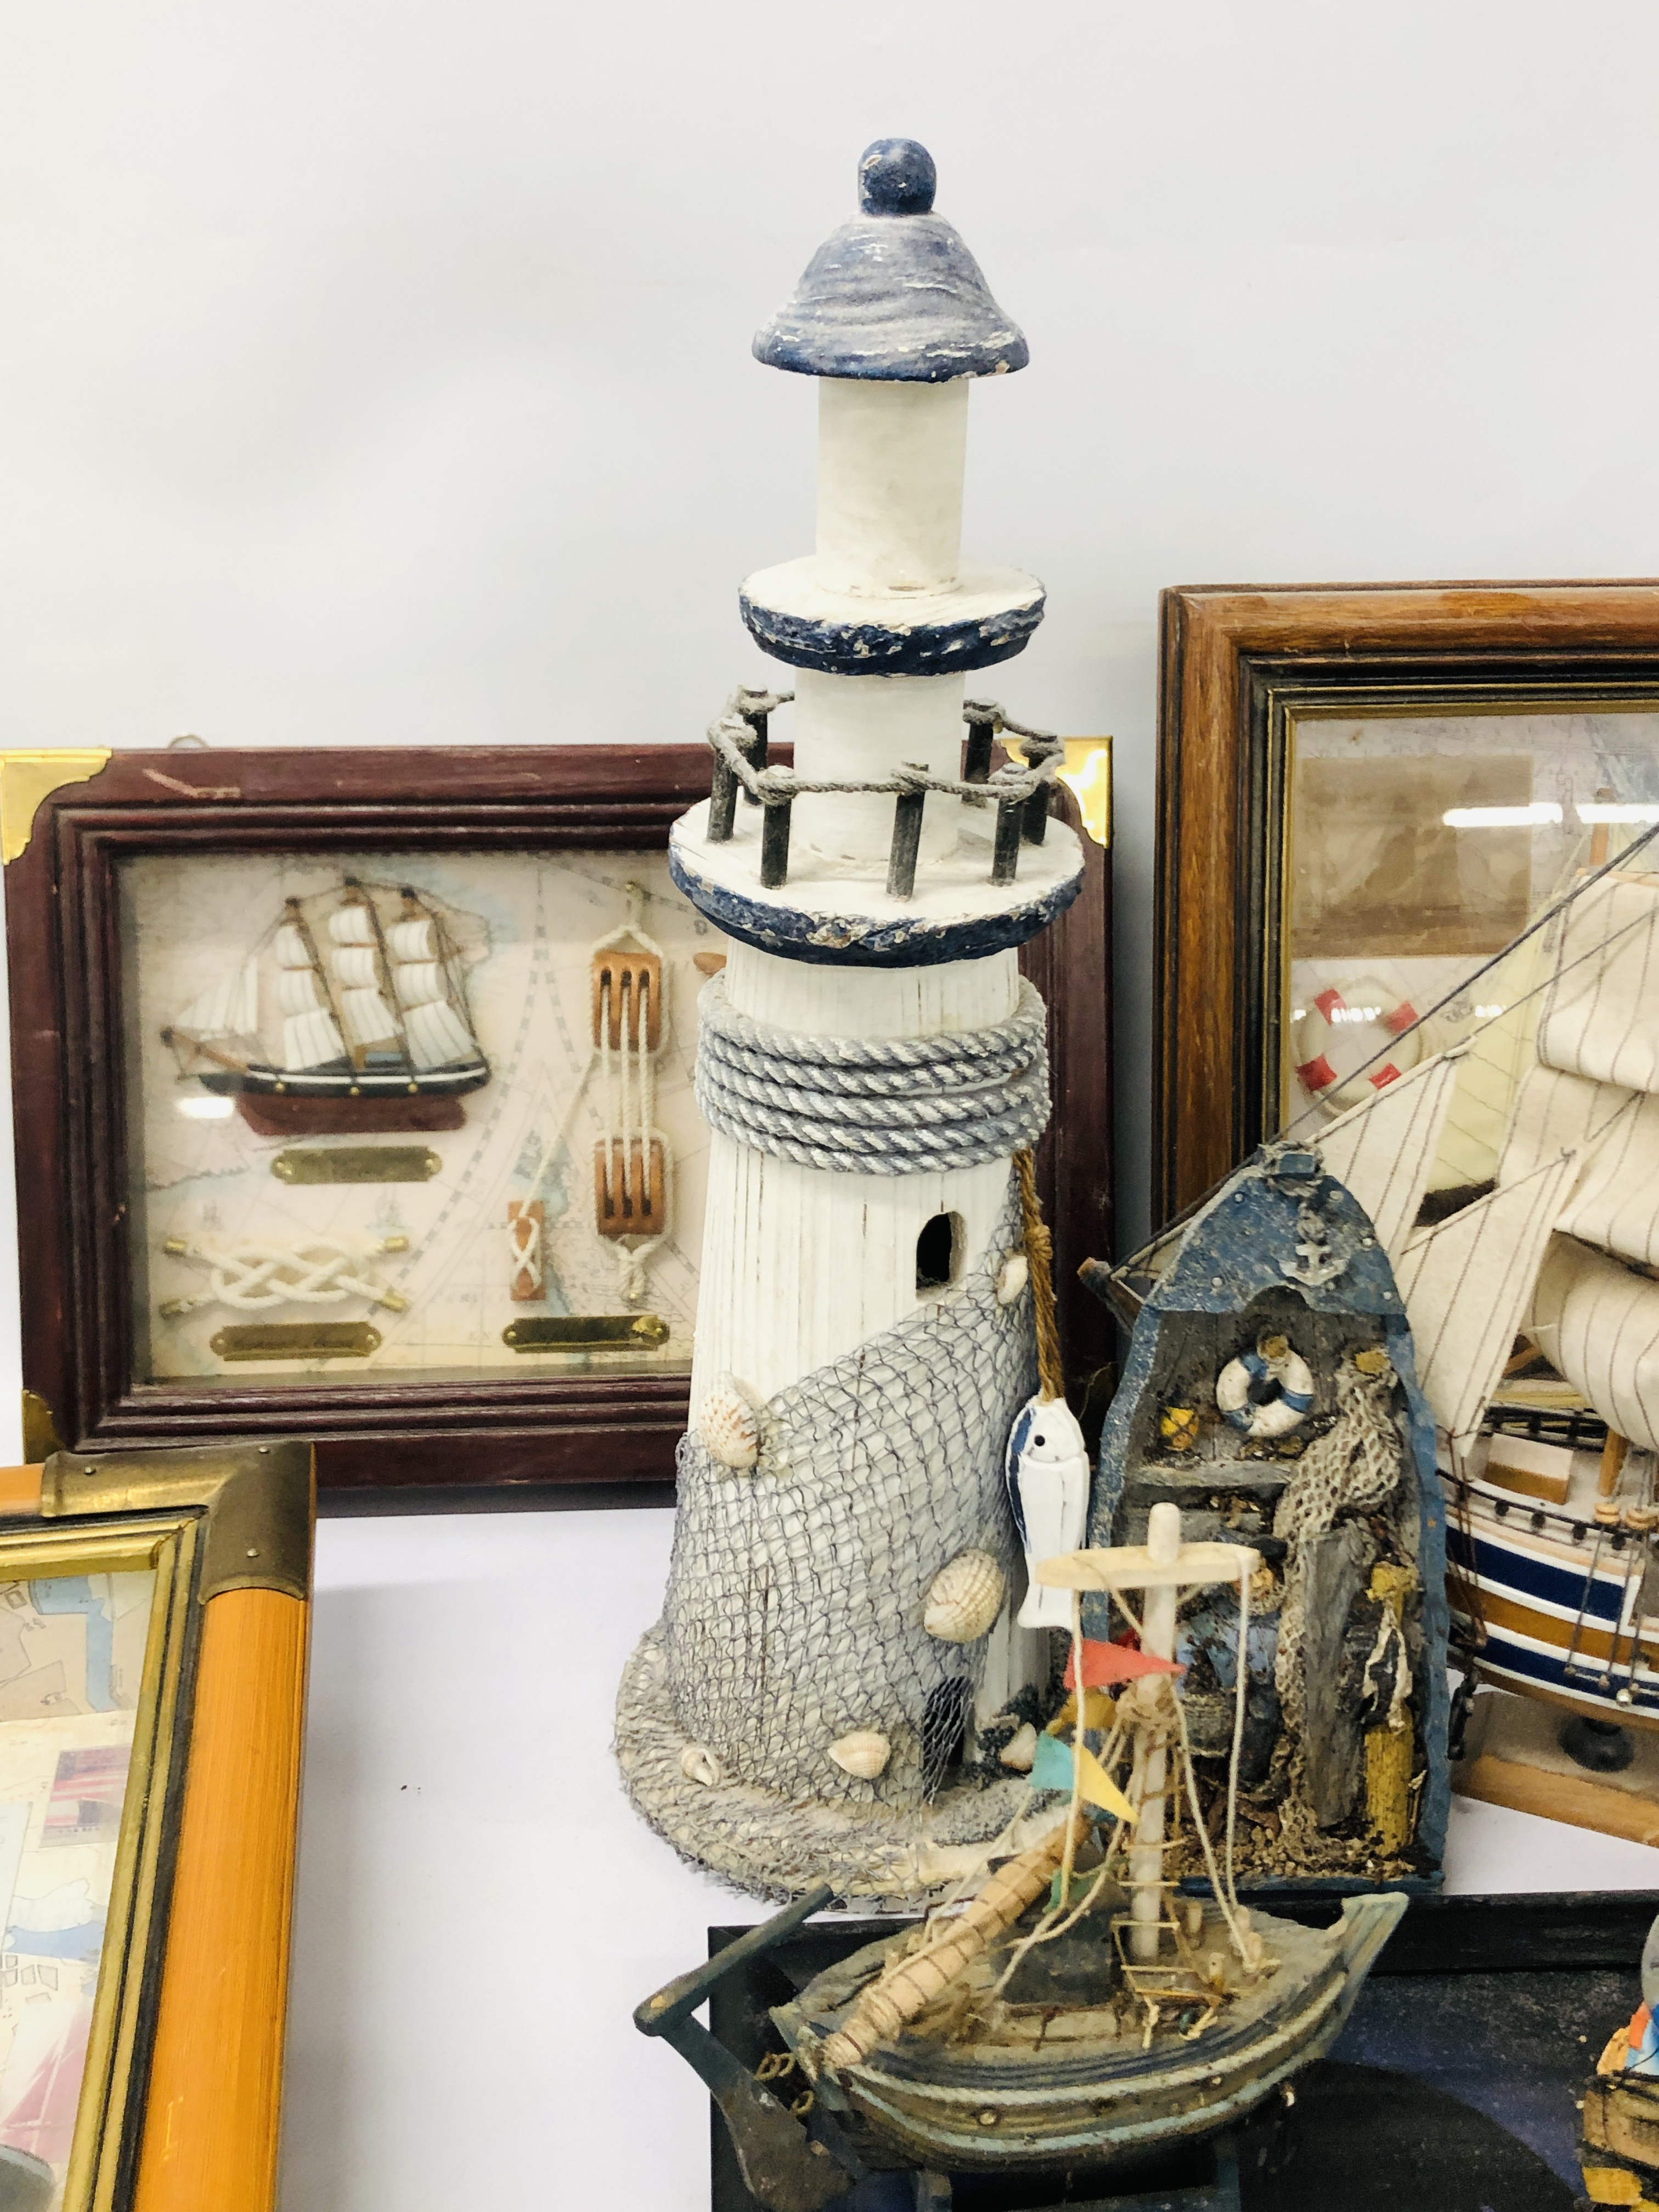 3 NAUTICAL 3D CASED DISPLAYS AND OTHER NAUTICAL ITEMS TO INCLUDE SAILING SHIPS, LIGHTHOUSES ETC. - Image 8 of 11